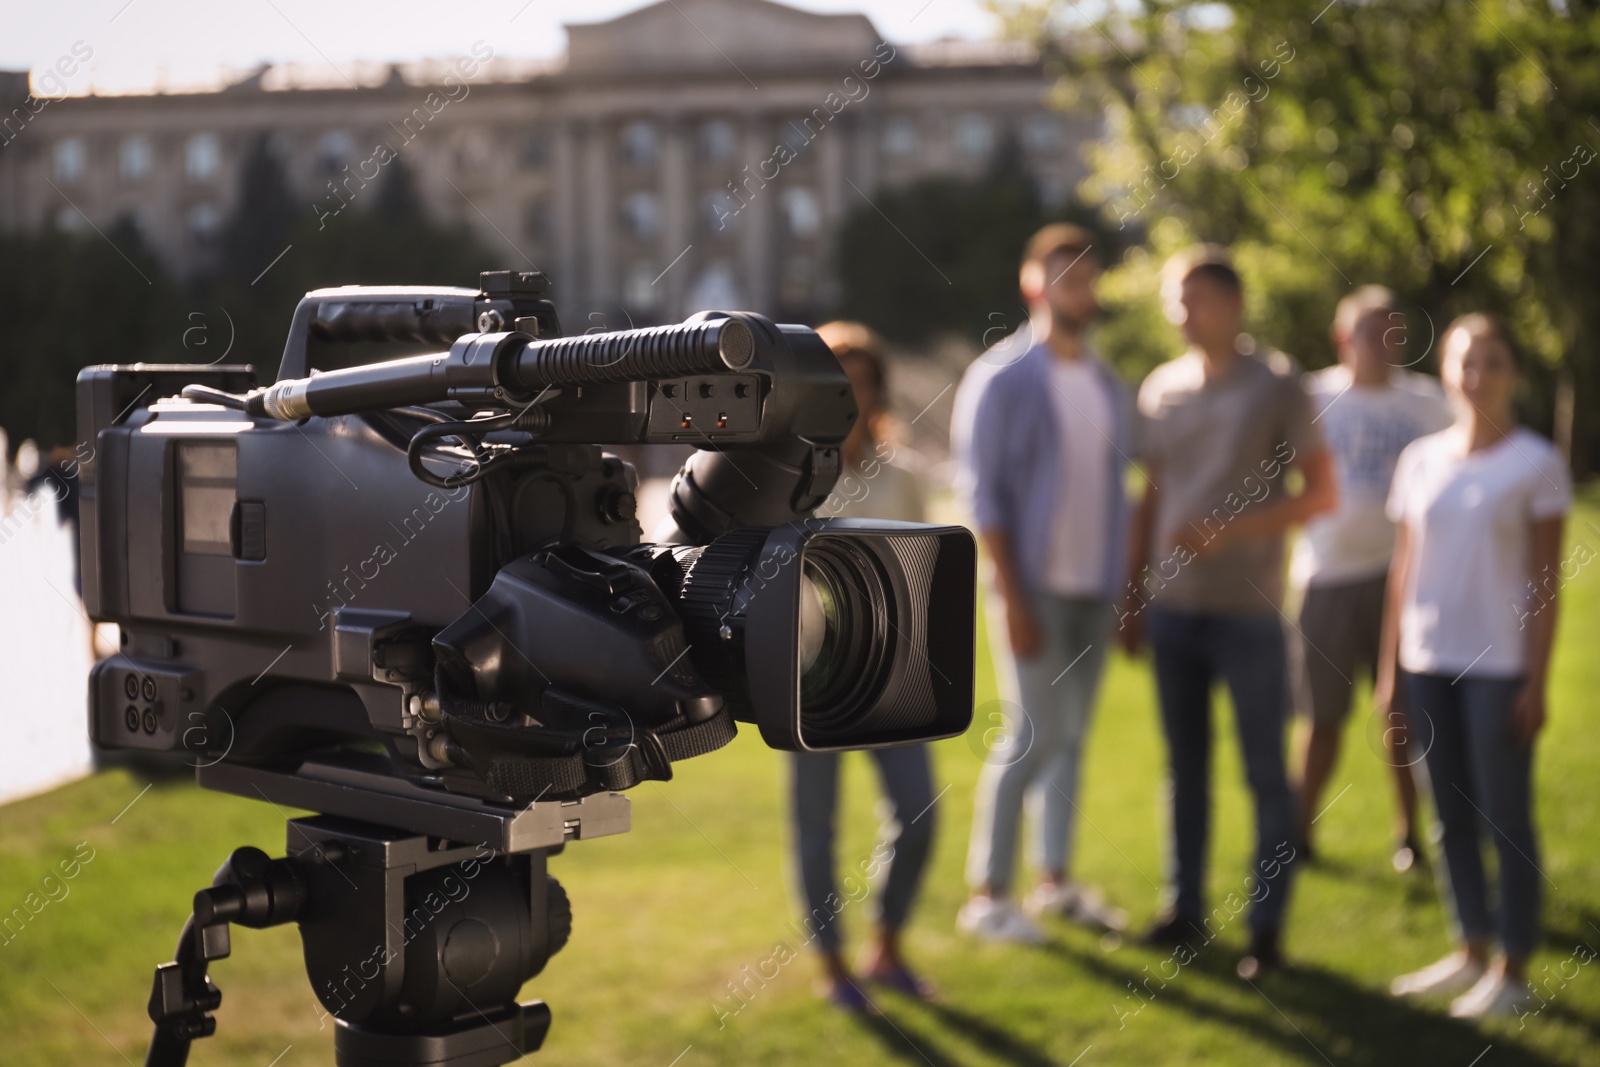 Photo of Professional video camera outdoors and group of people on background